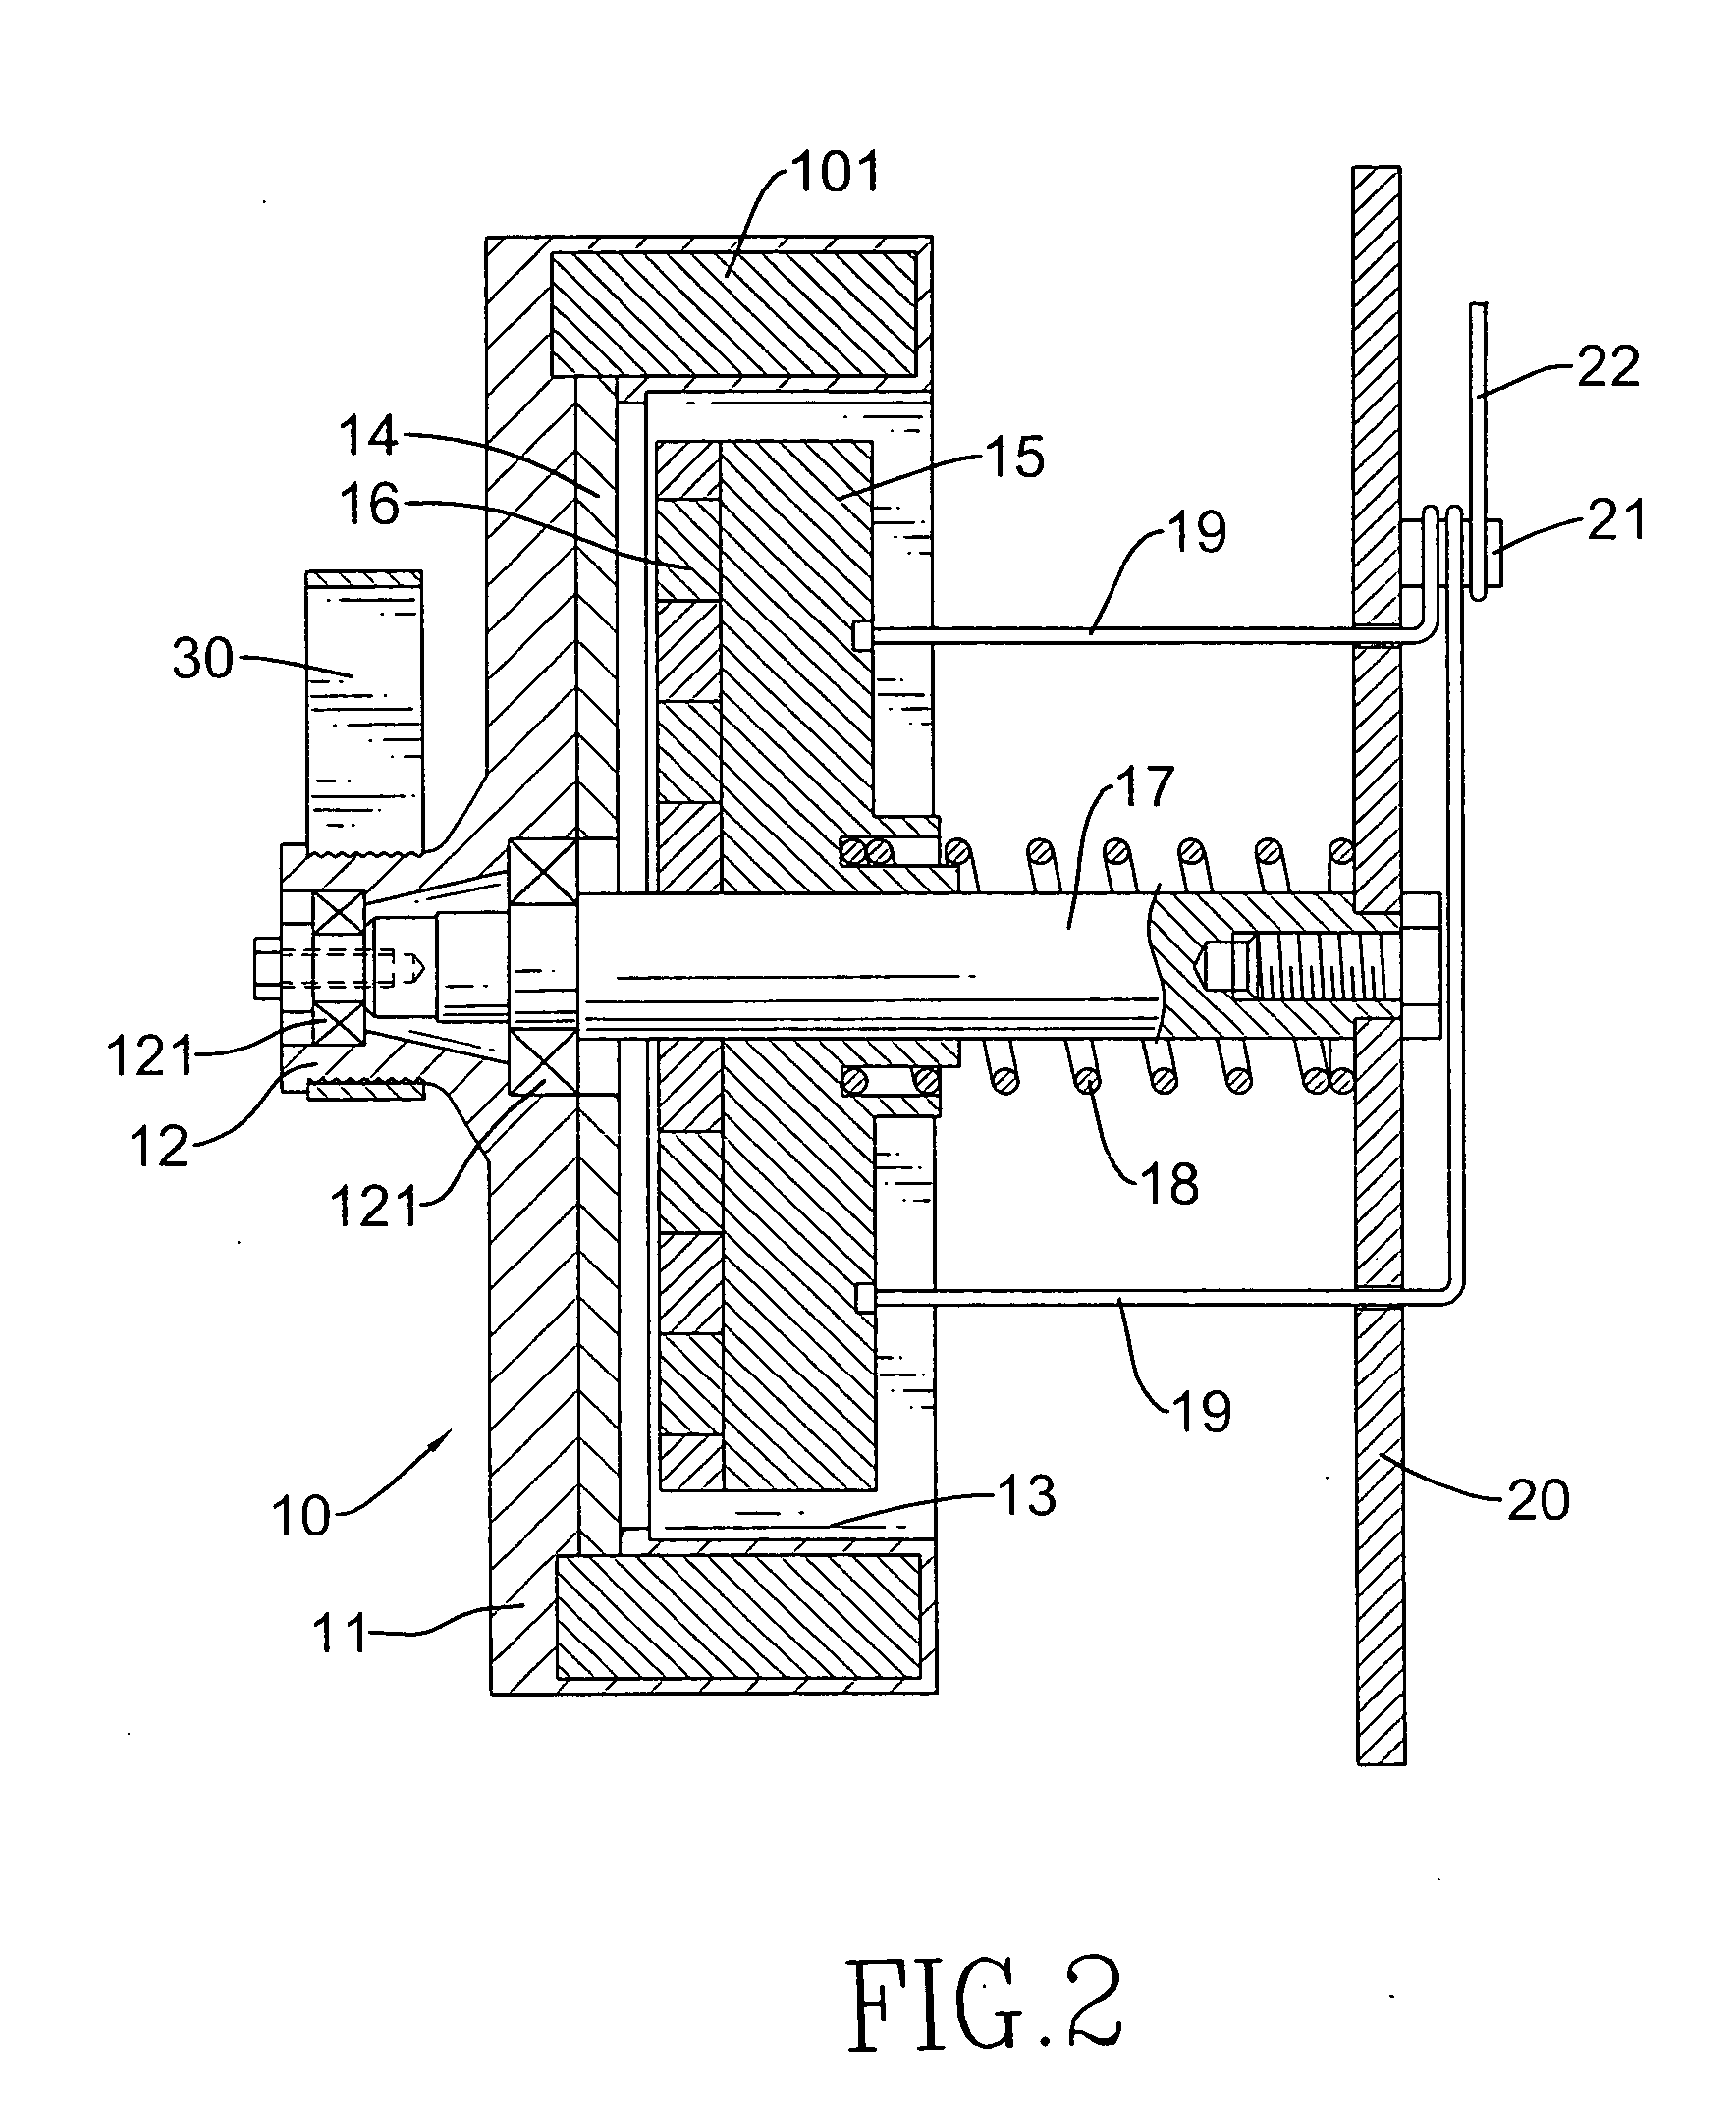 Magnetic dampening unit for an exercise gym apparatus